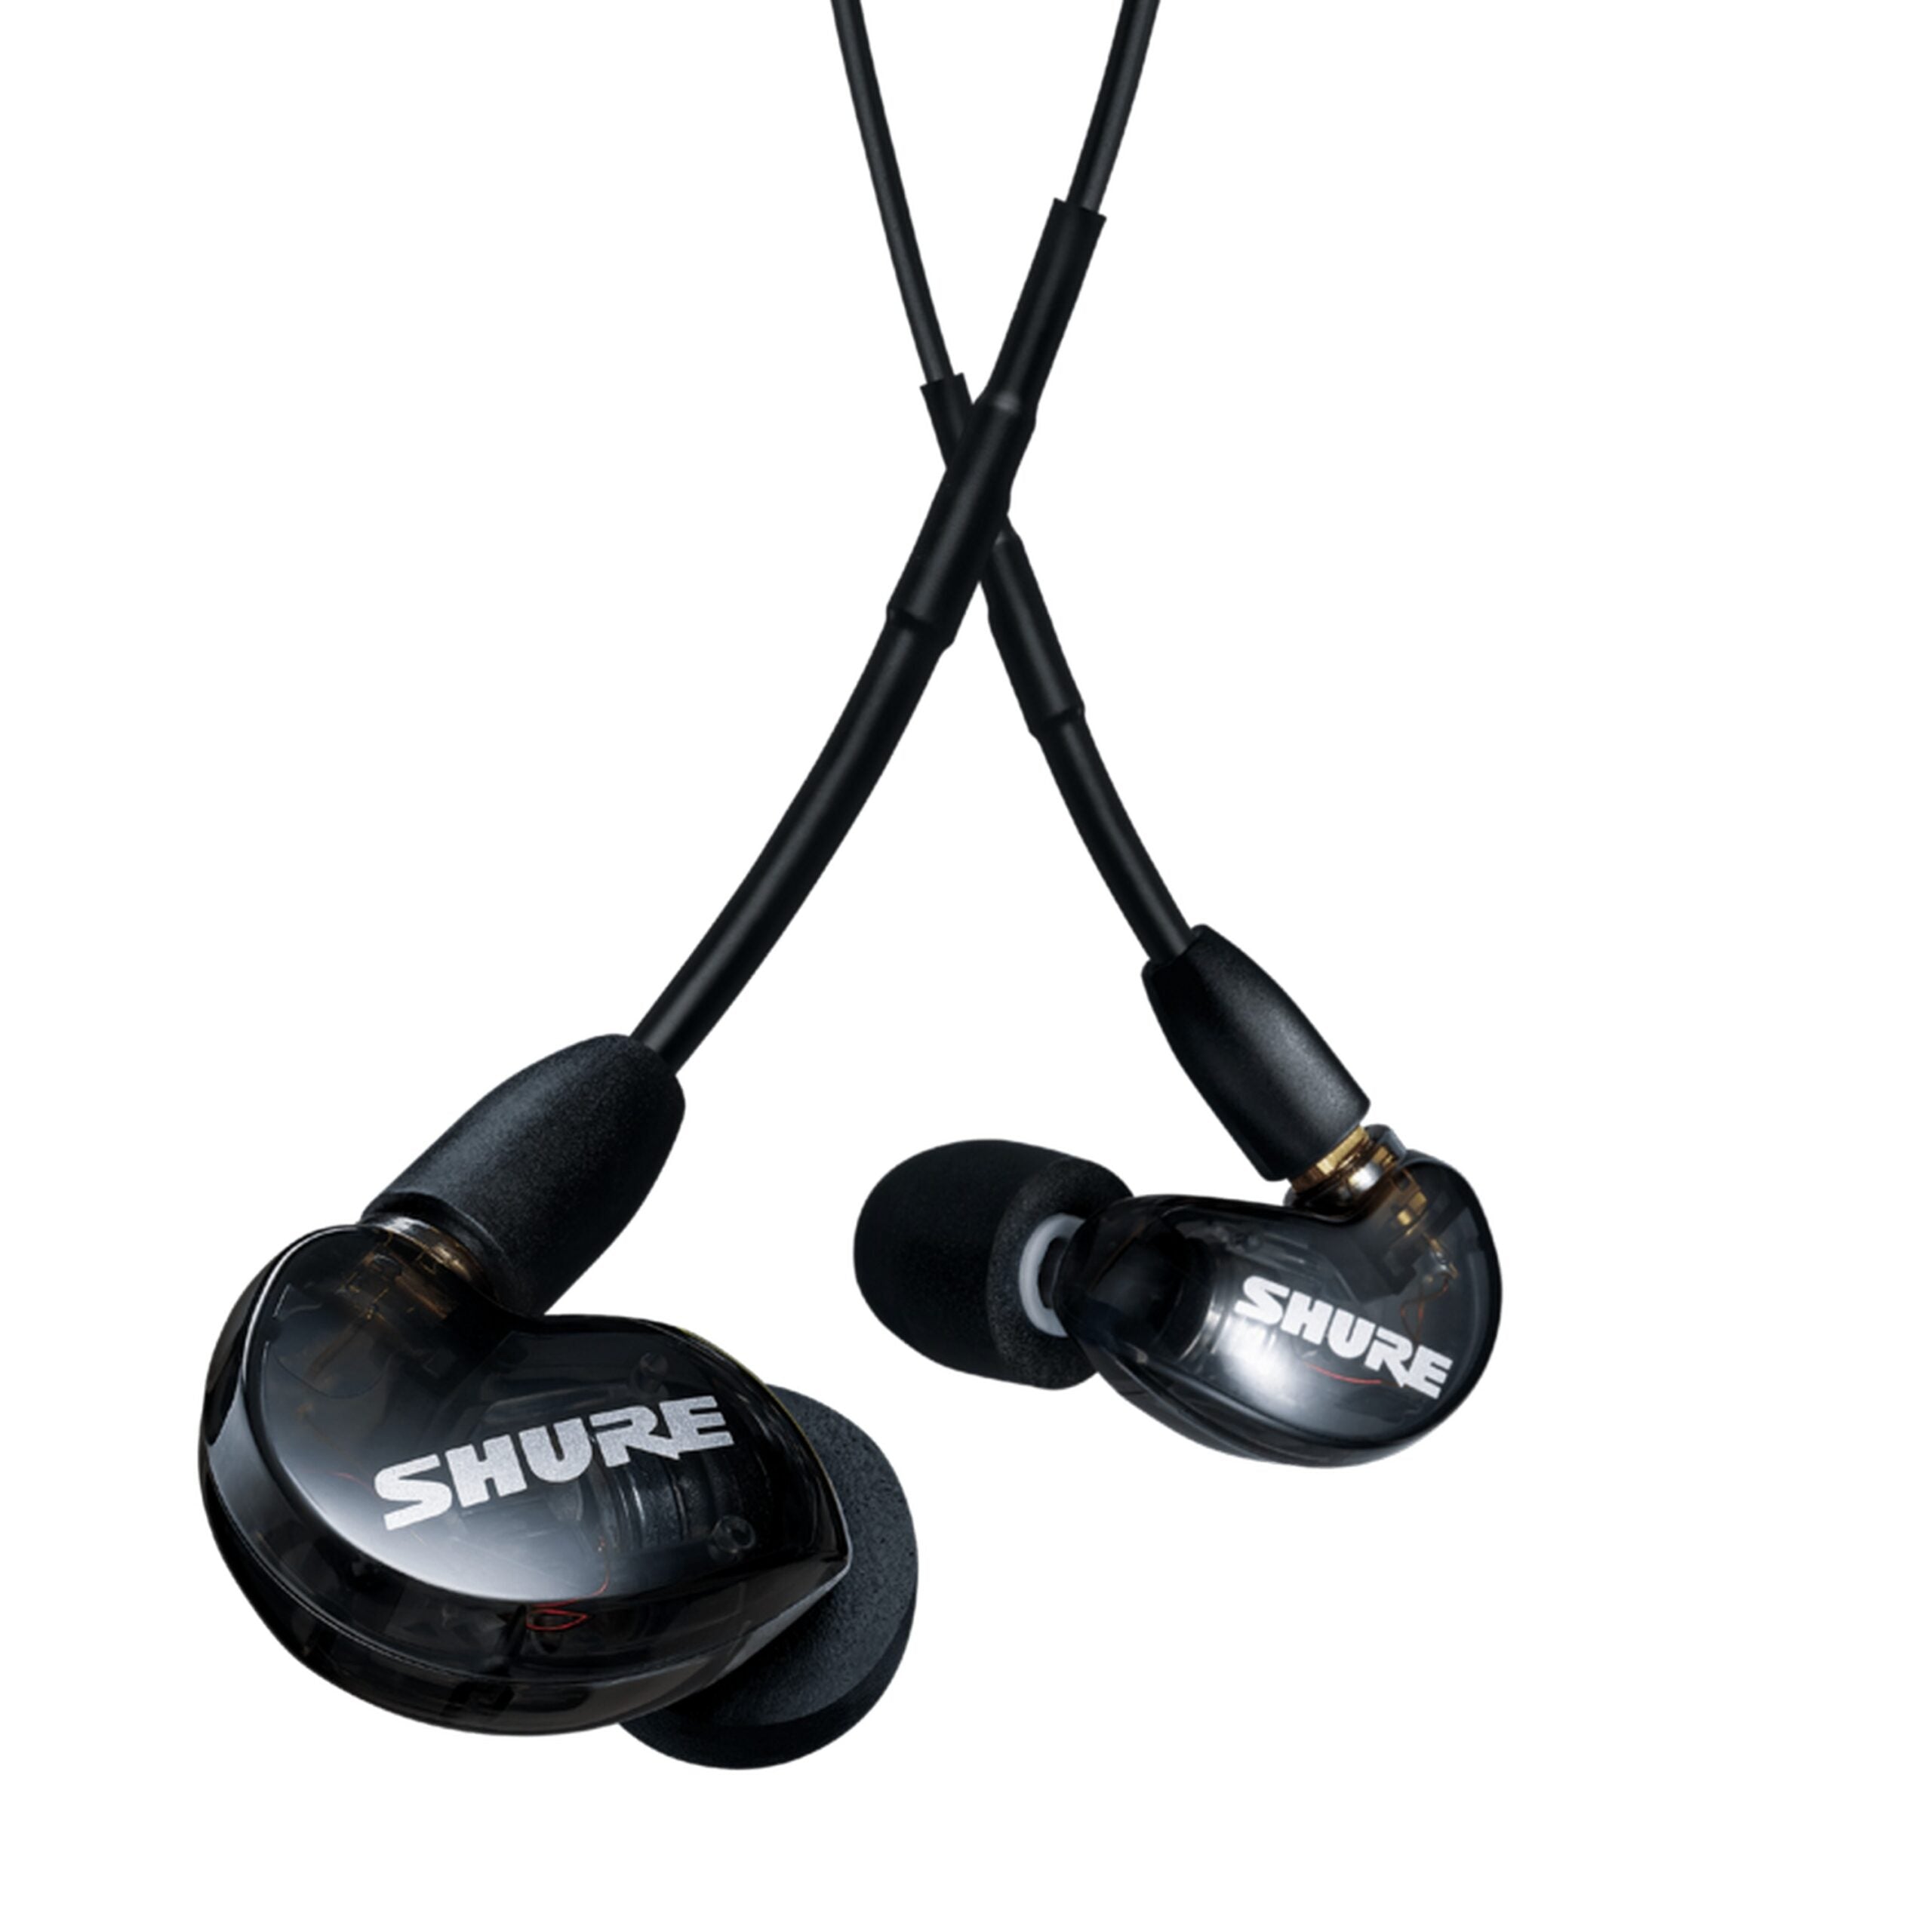 Shure AONIC 215 SE215DYBK+UNI Wired Sound Isolating In-Ear